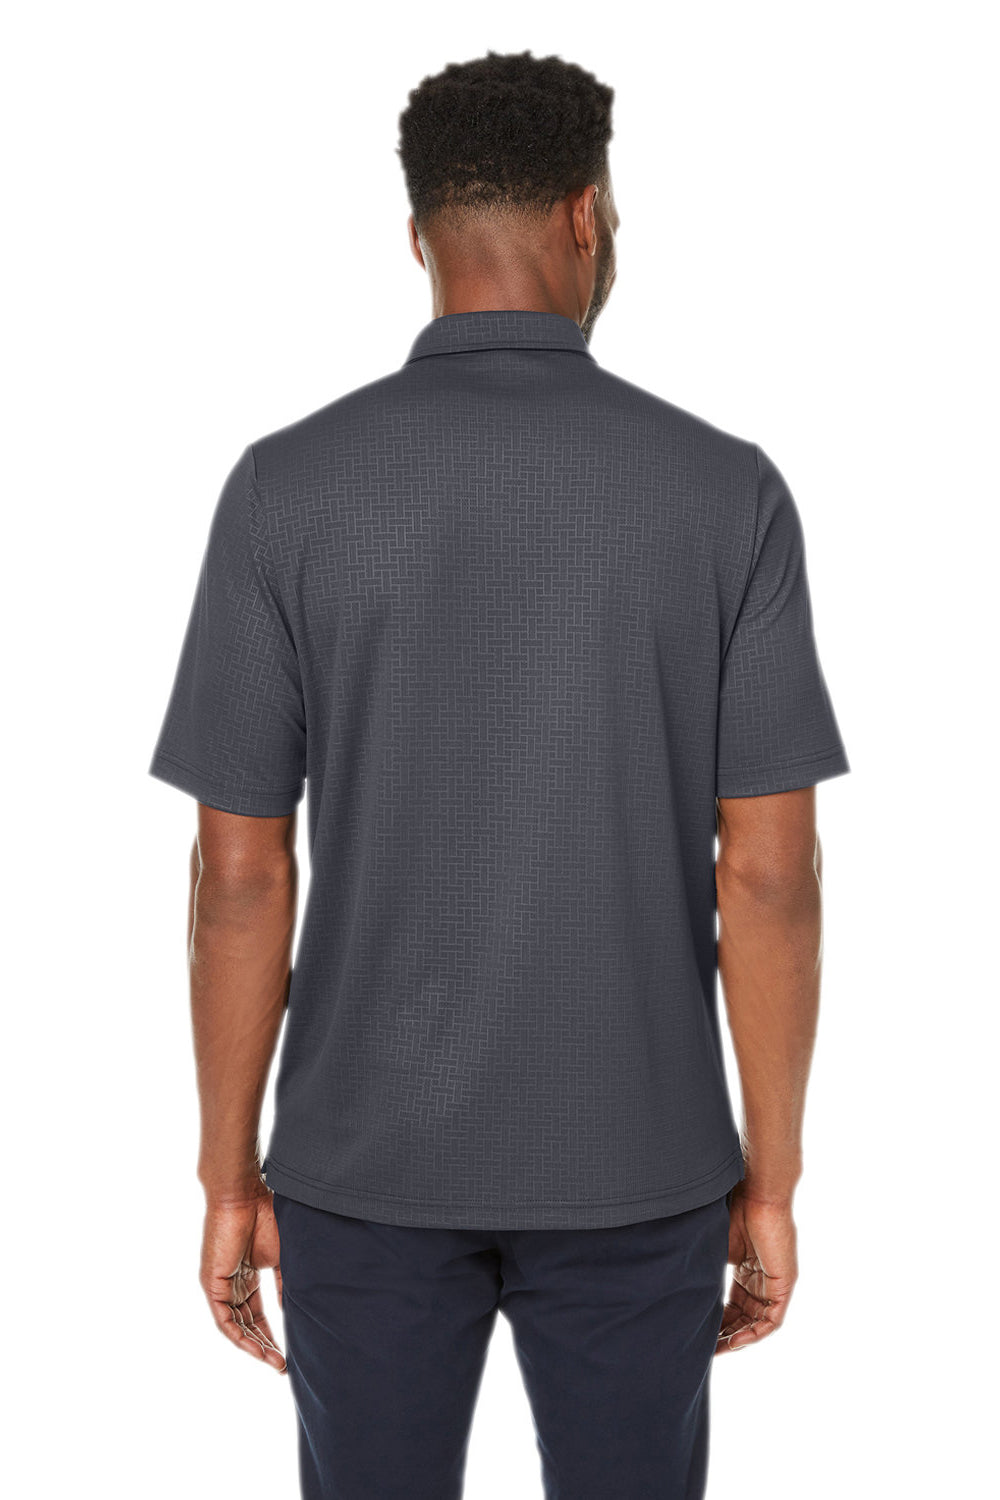 North End NE102 Mens Replay Recycled Short Sleeve Polo Shirt Carbon Grey Back